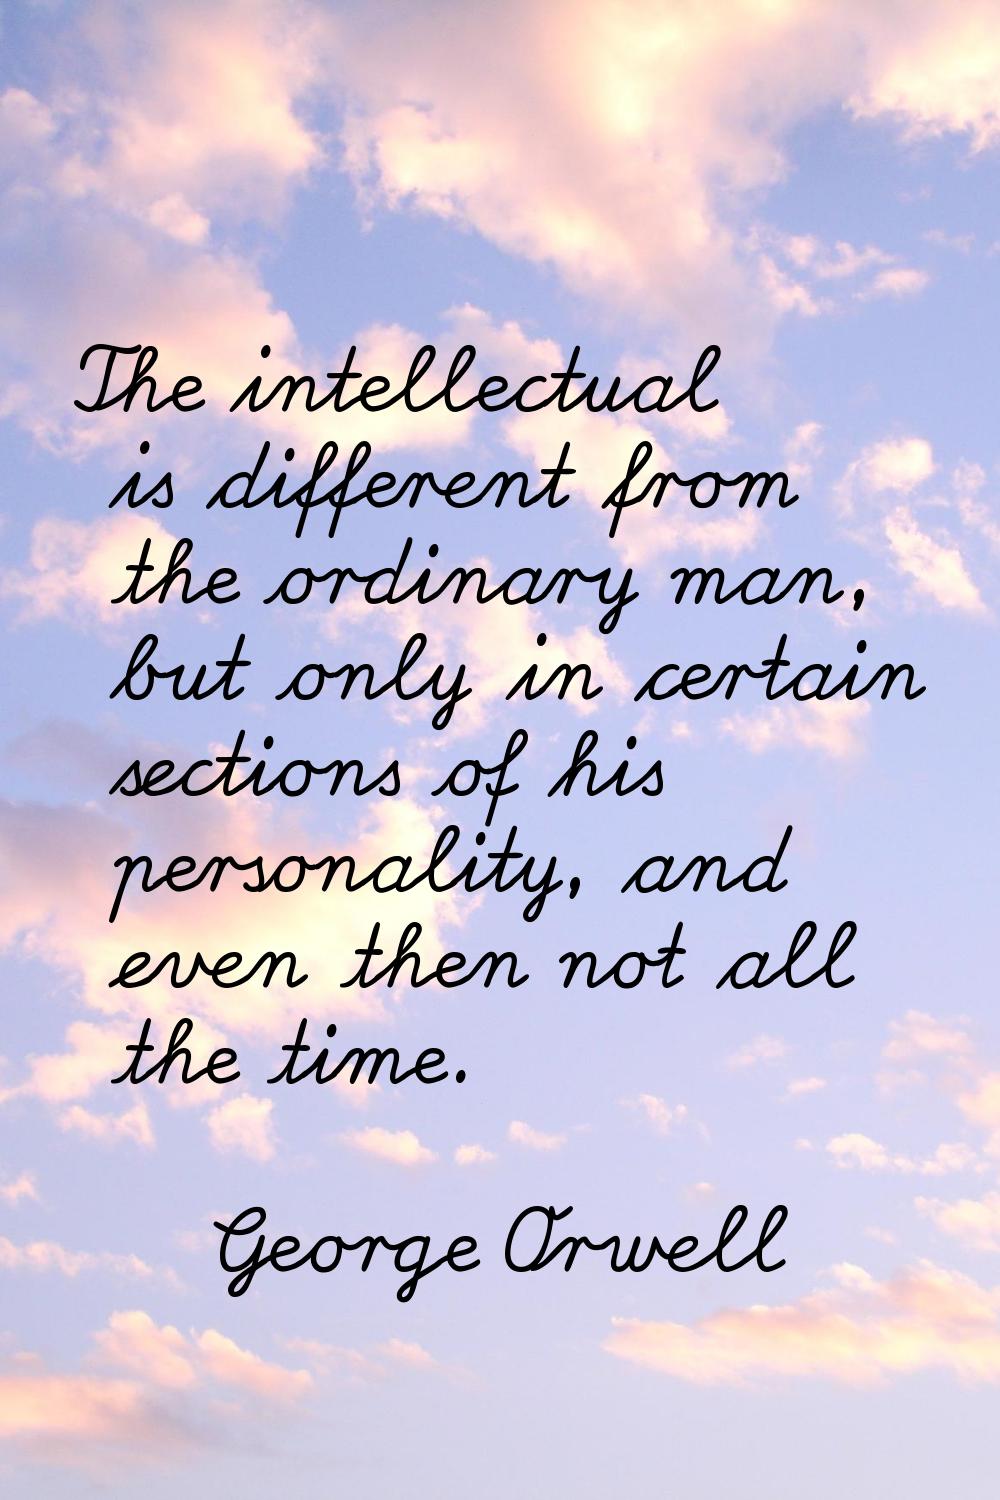 The intellectual is different from the ordinary man, but only in certain sections of his personalit